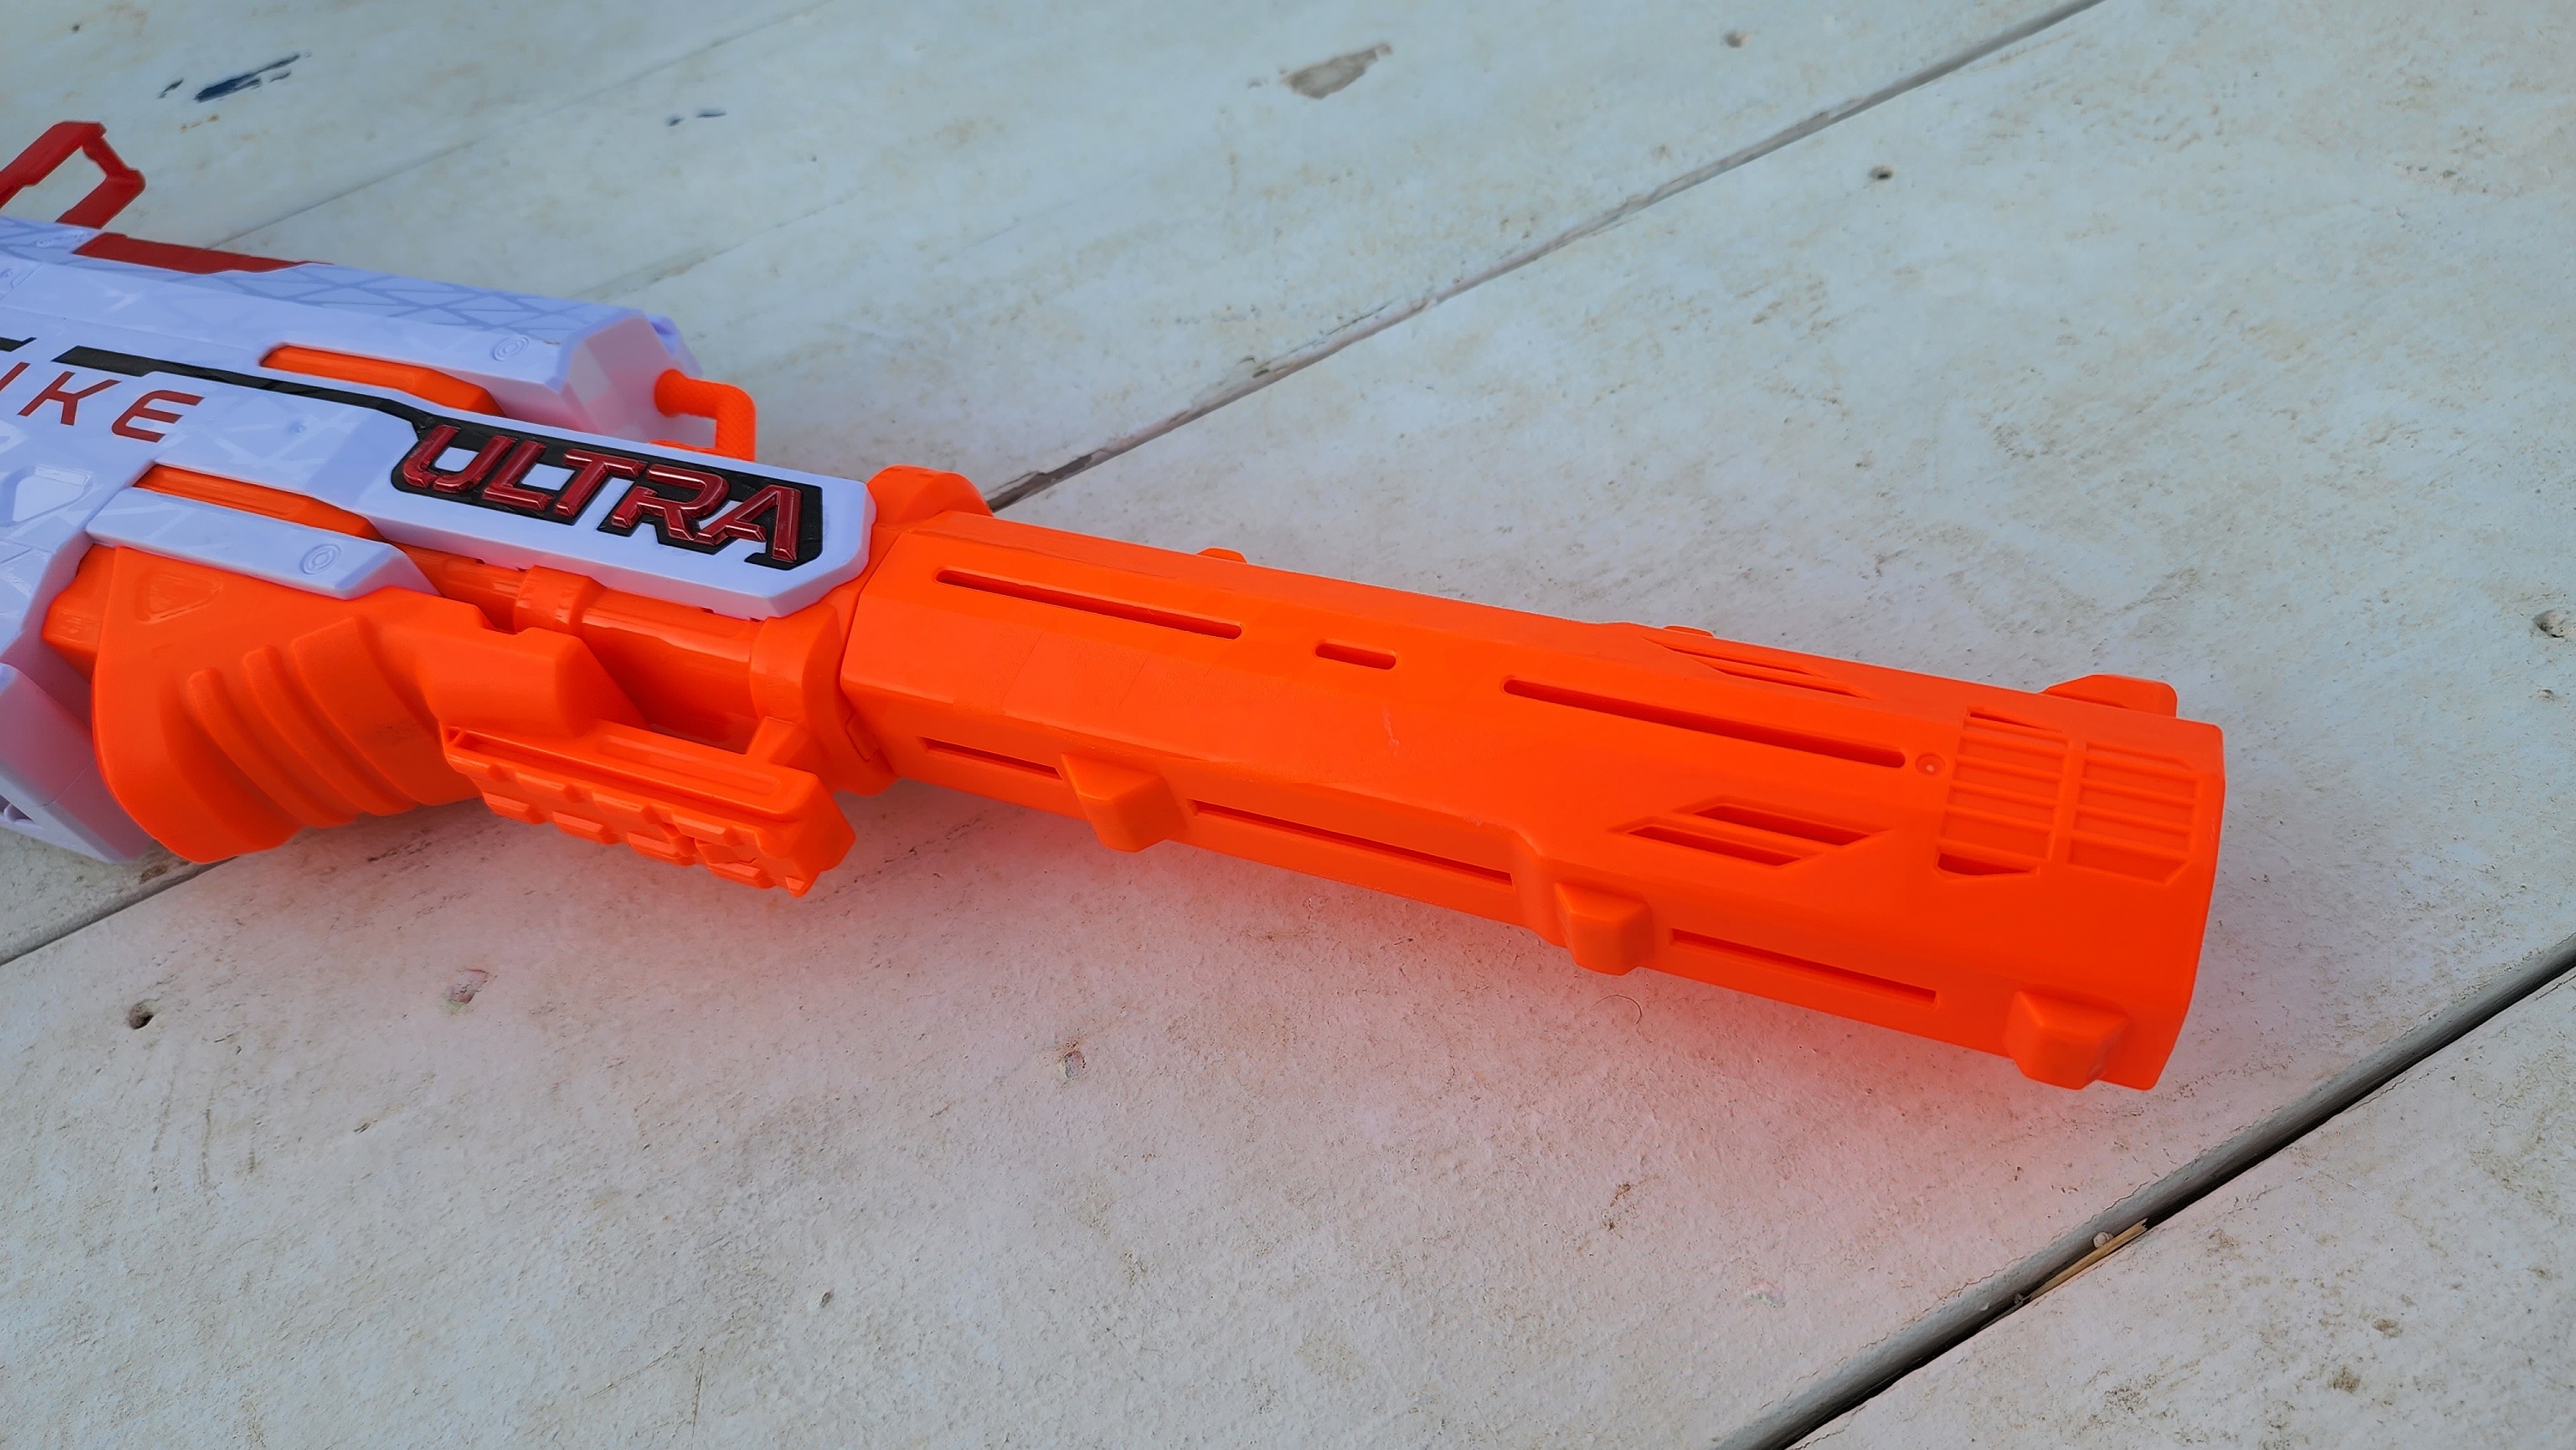 Nerf Ultra Strike available : r/Nerf